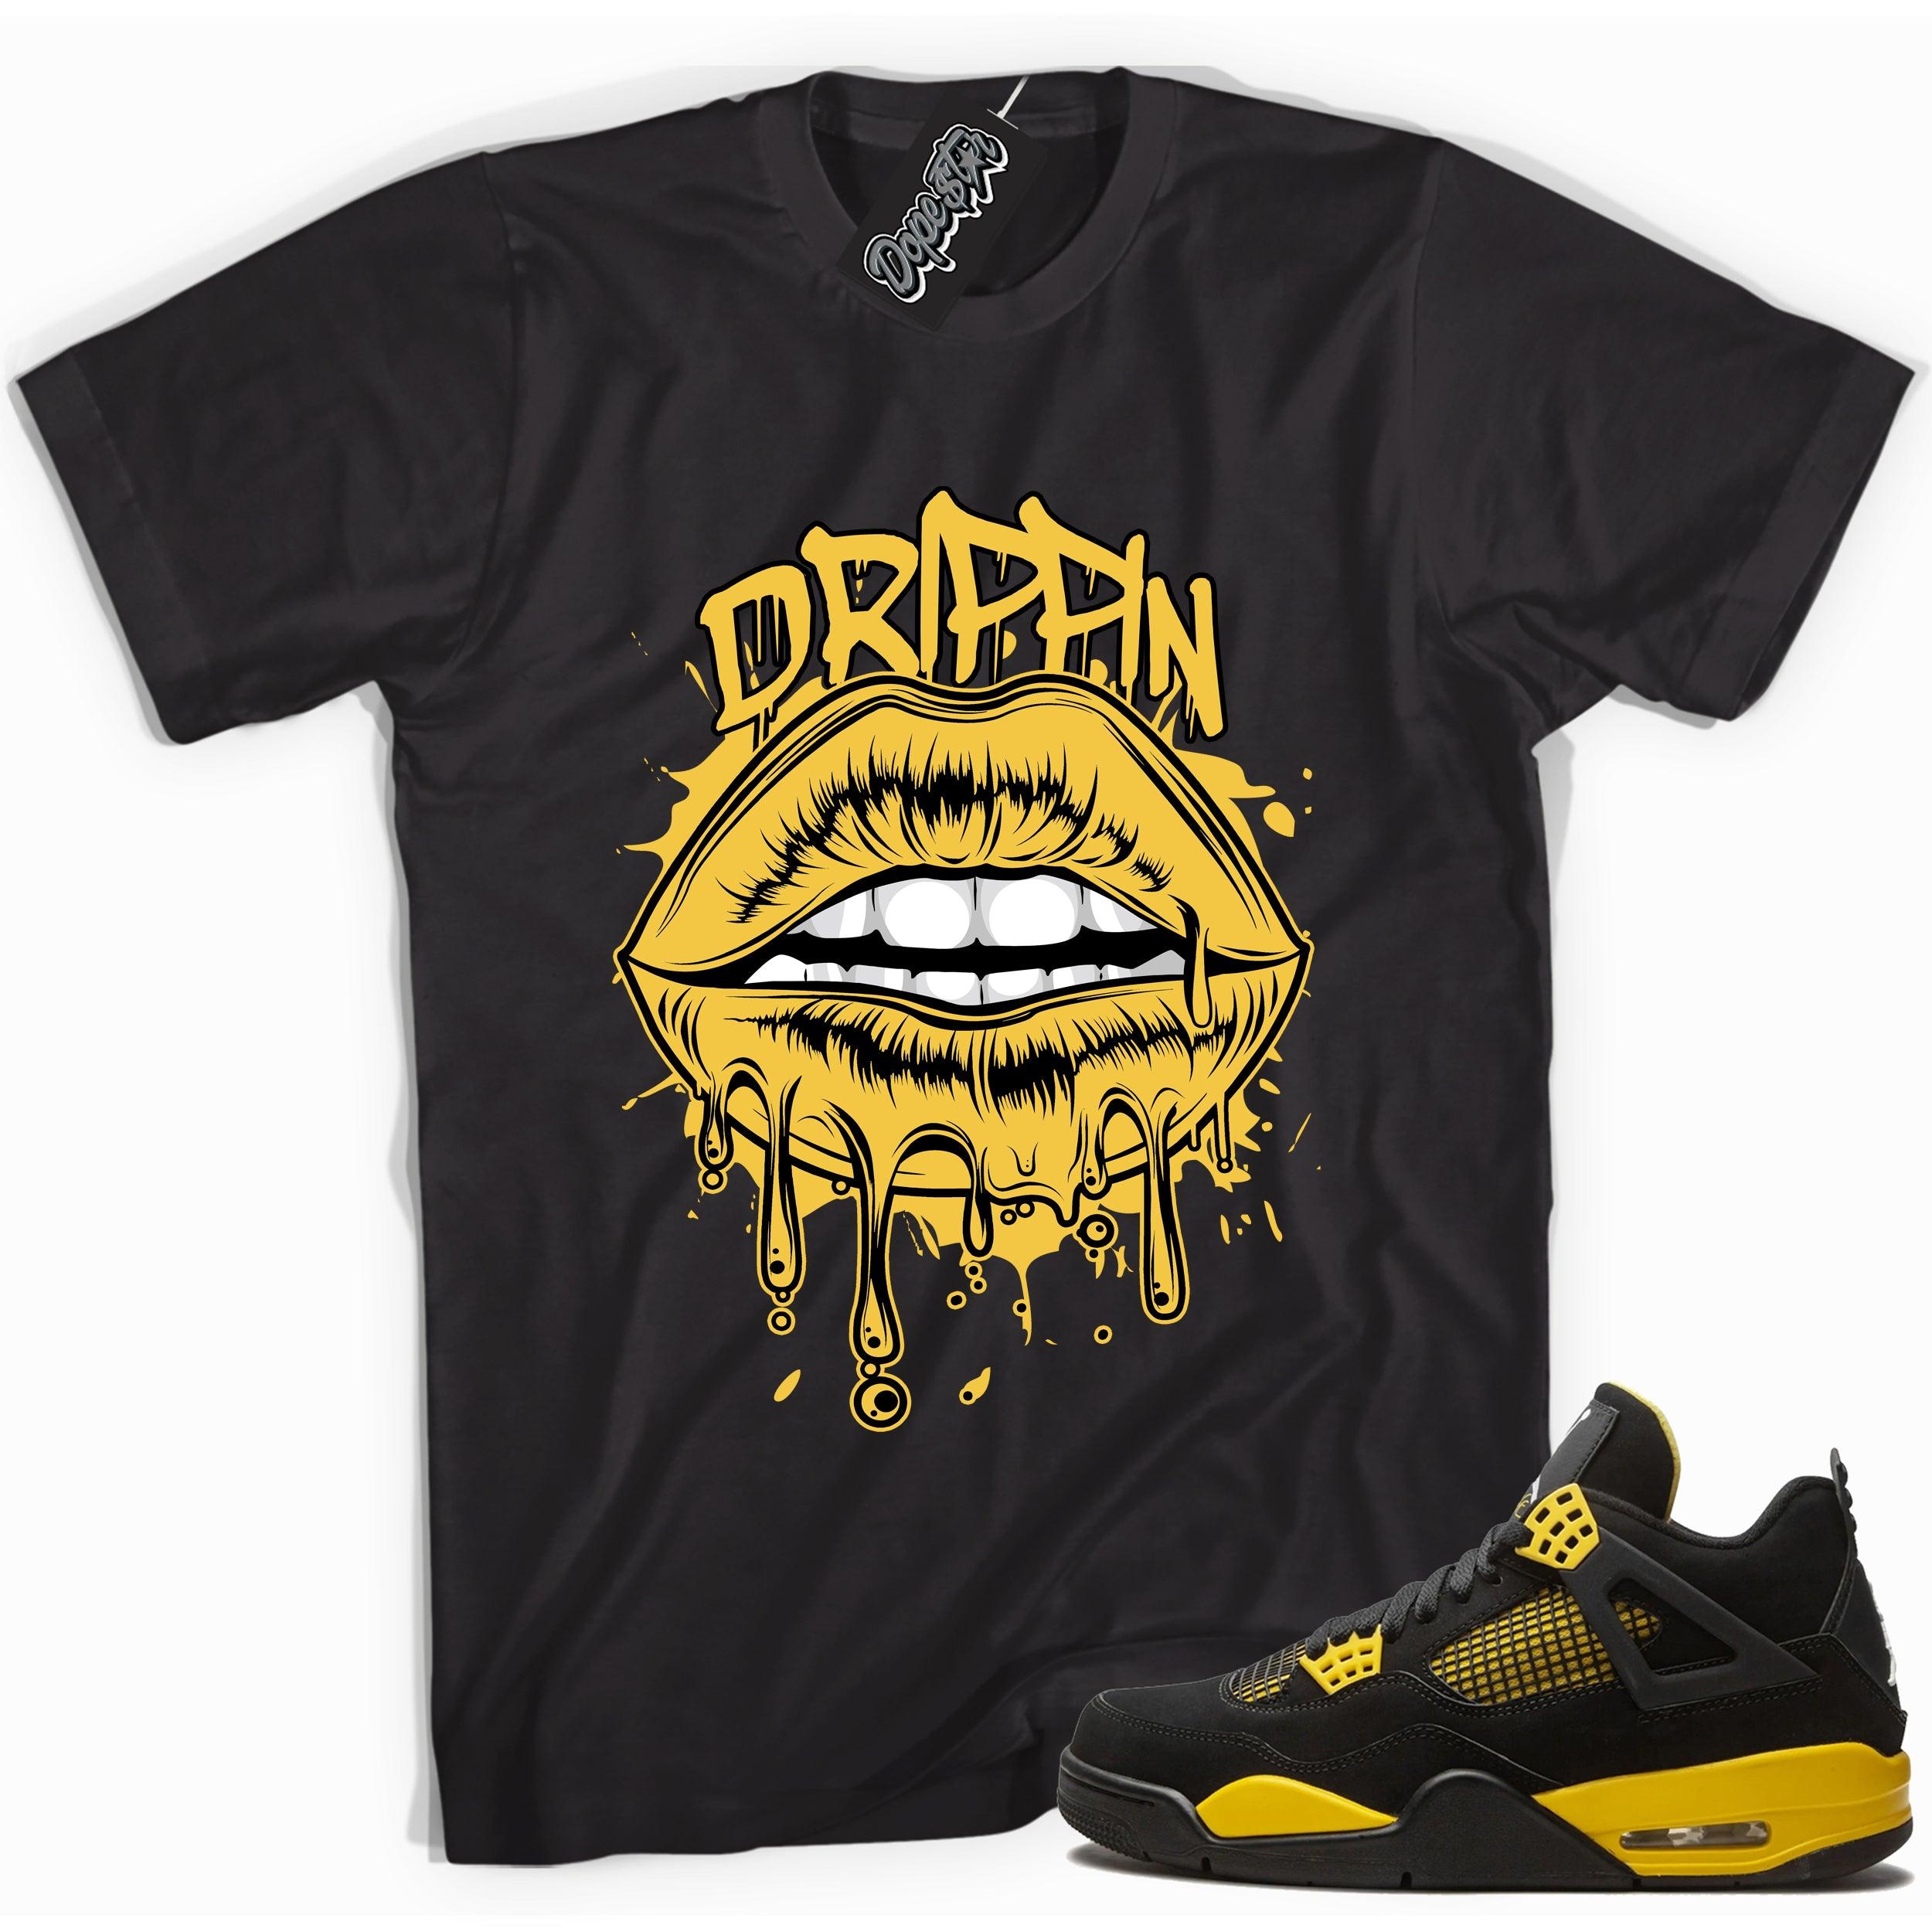 Cool black graphic tee with 'drippin' print, that perfectly matches  Air Jordan 4 Thunder sneakers